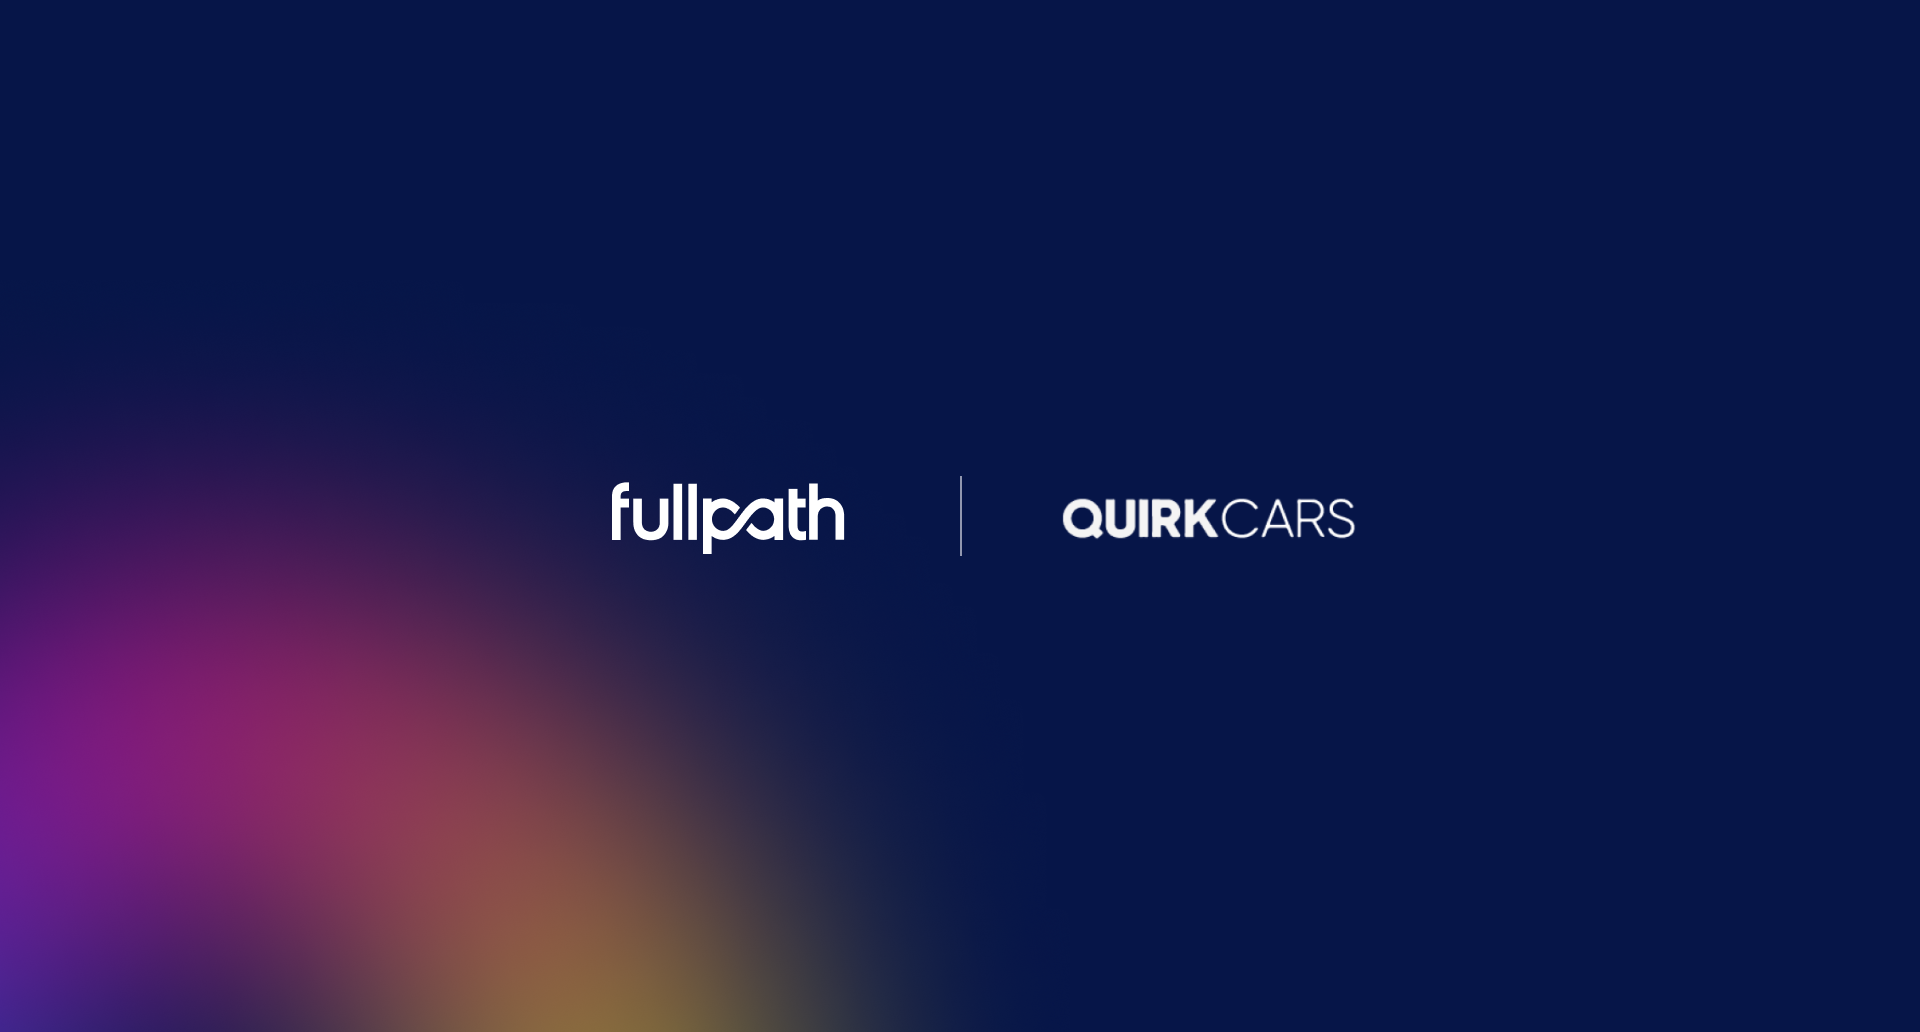 How Quirk Chevy Earned $2.2 Million in Sales by Activating Their Data with Fullpath